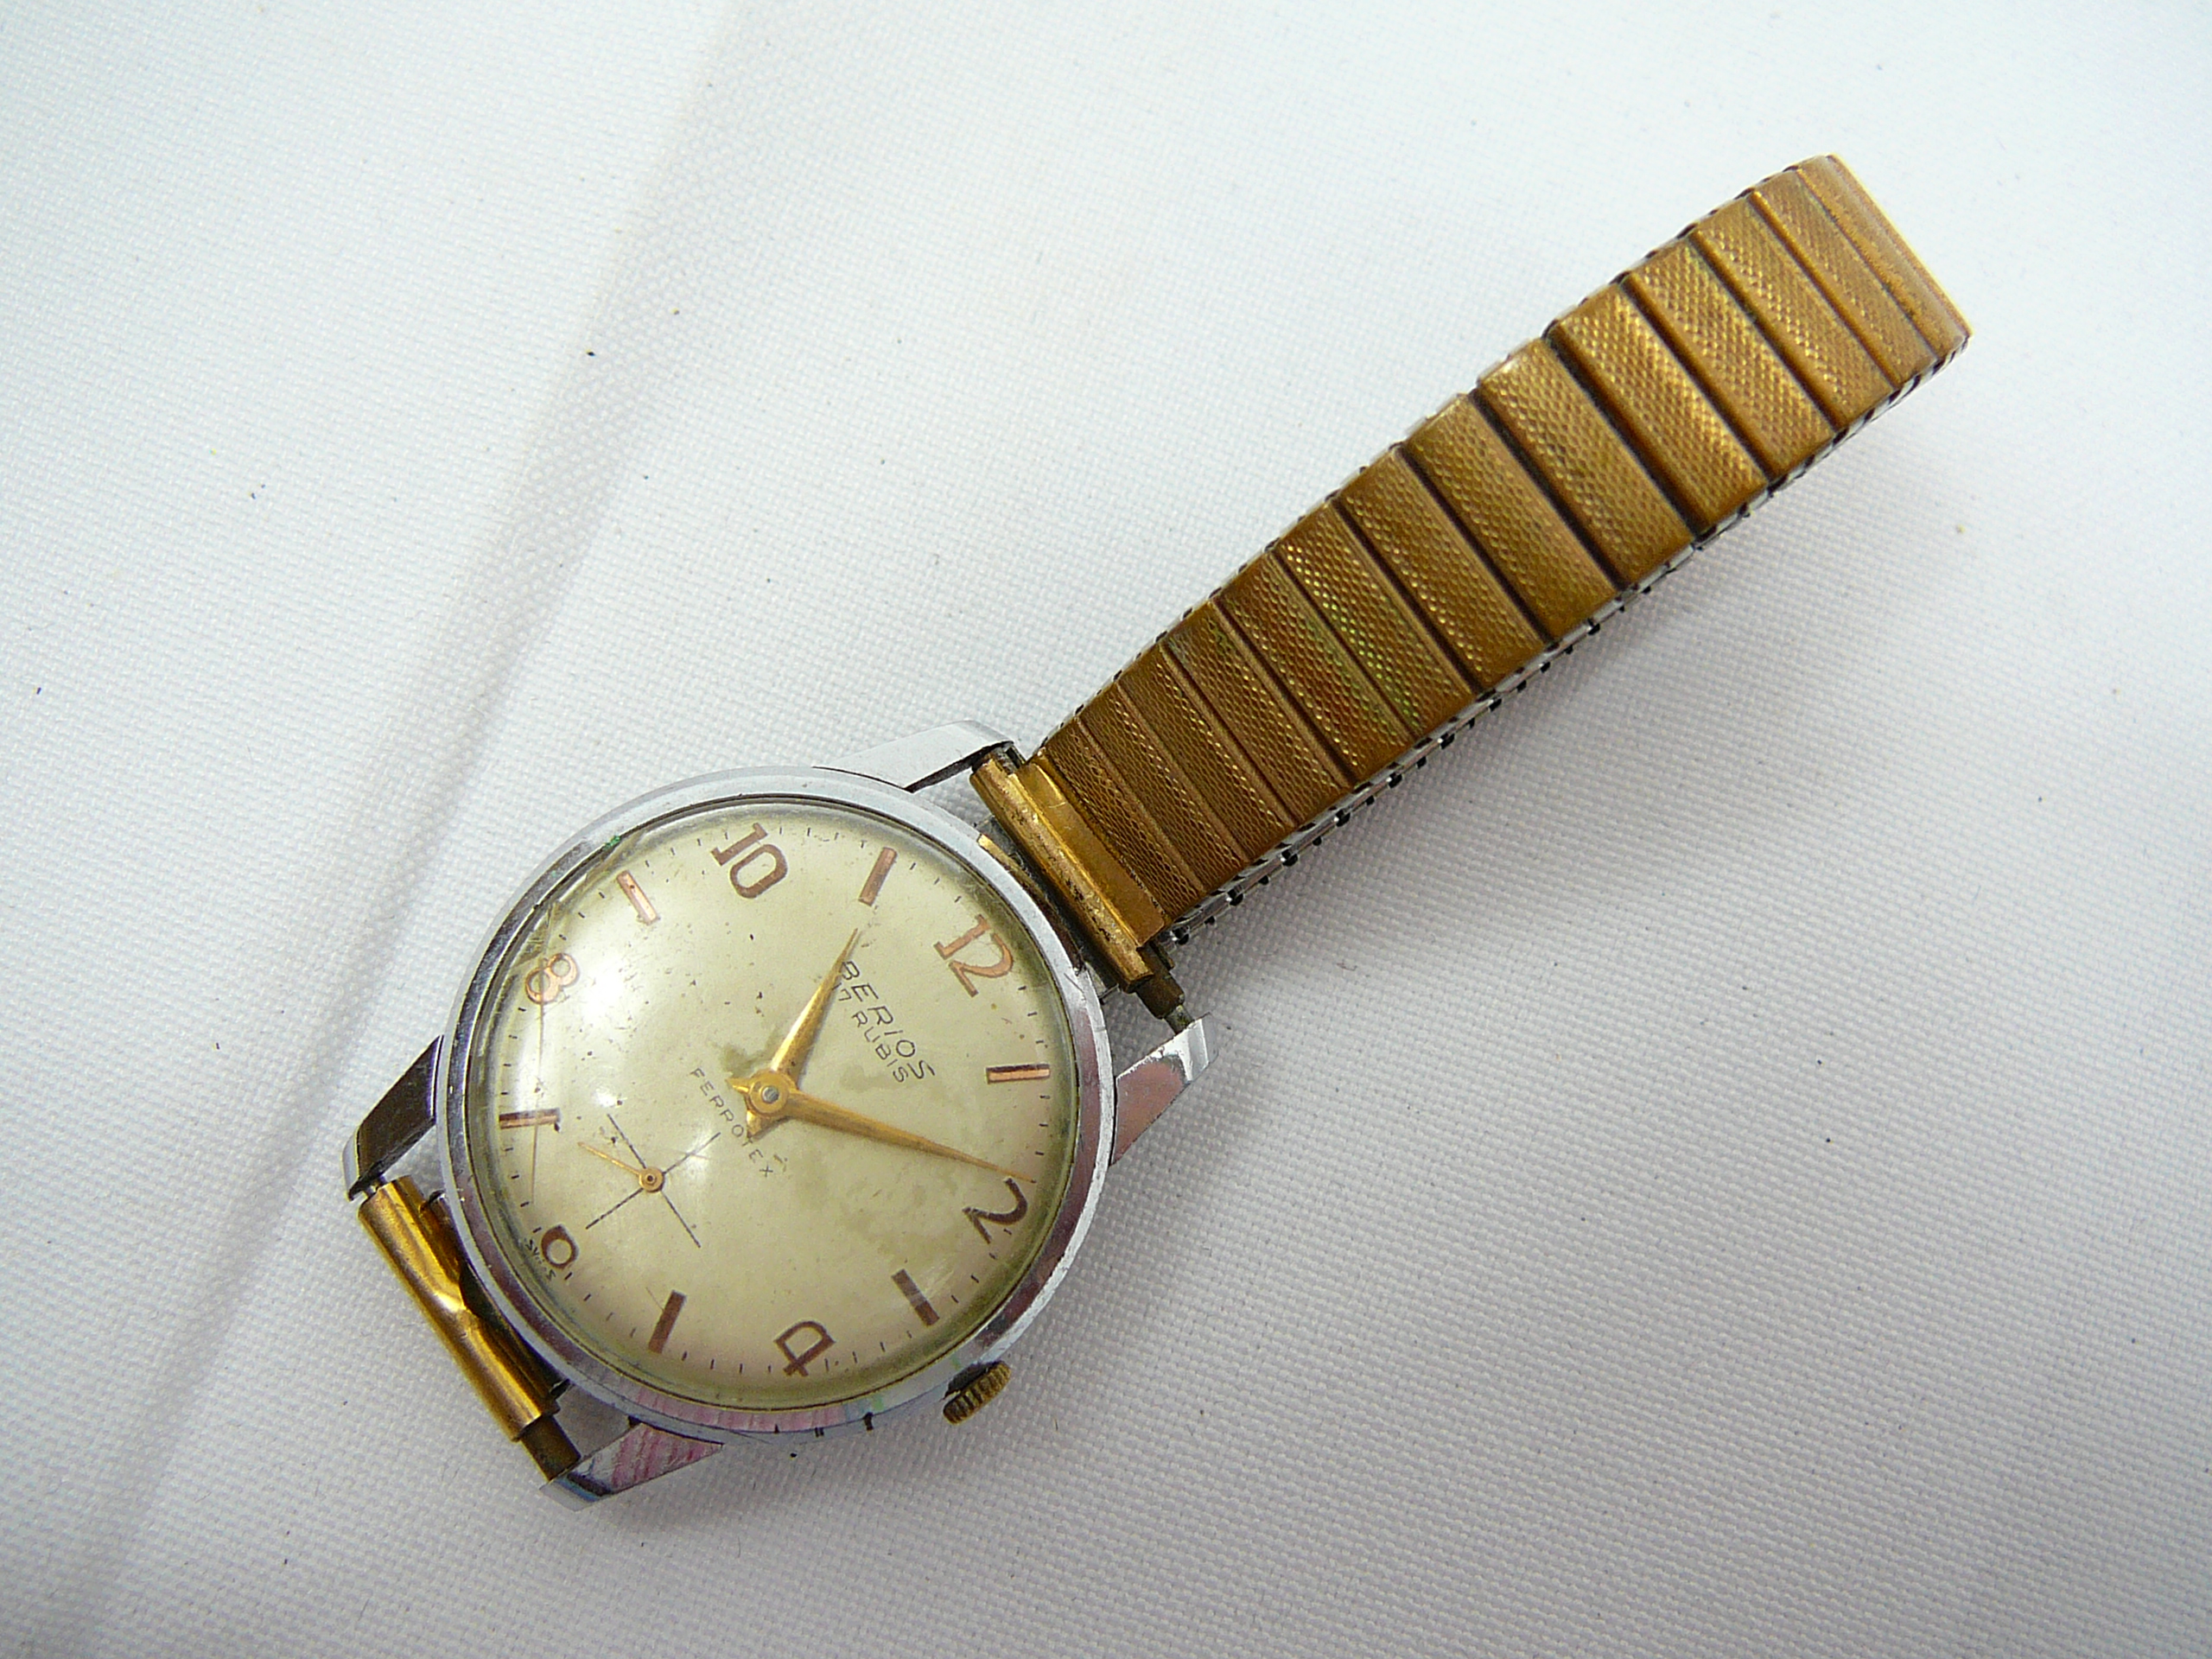 Gents vintage Berious wristwatch - Image 3 of 4